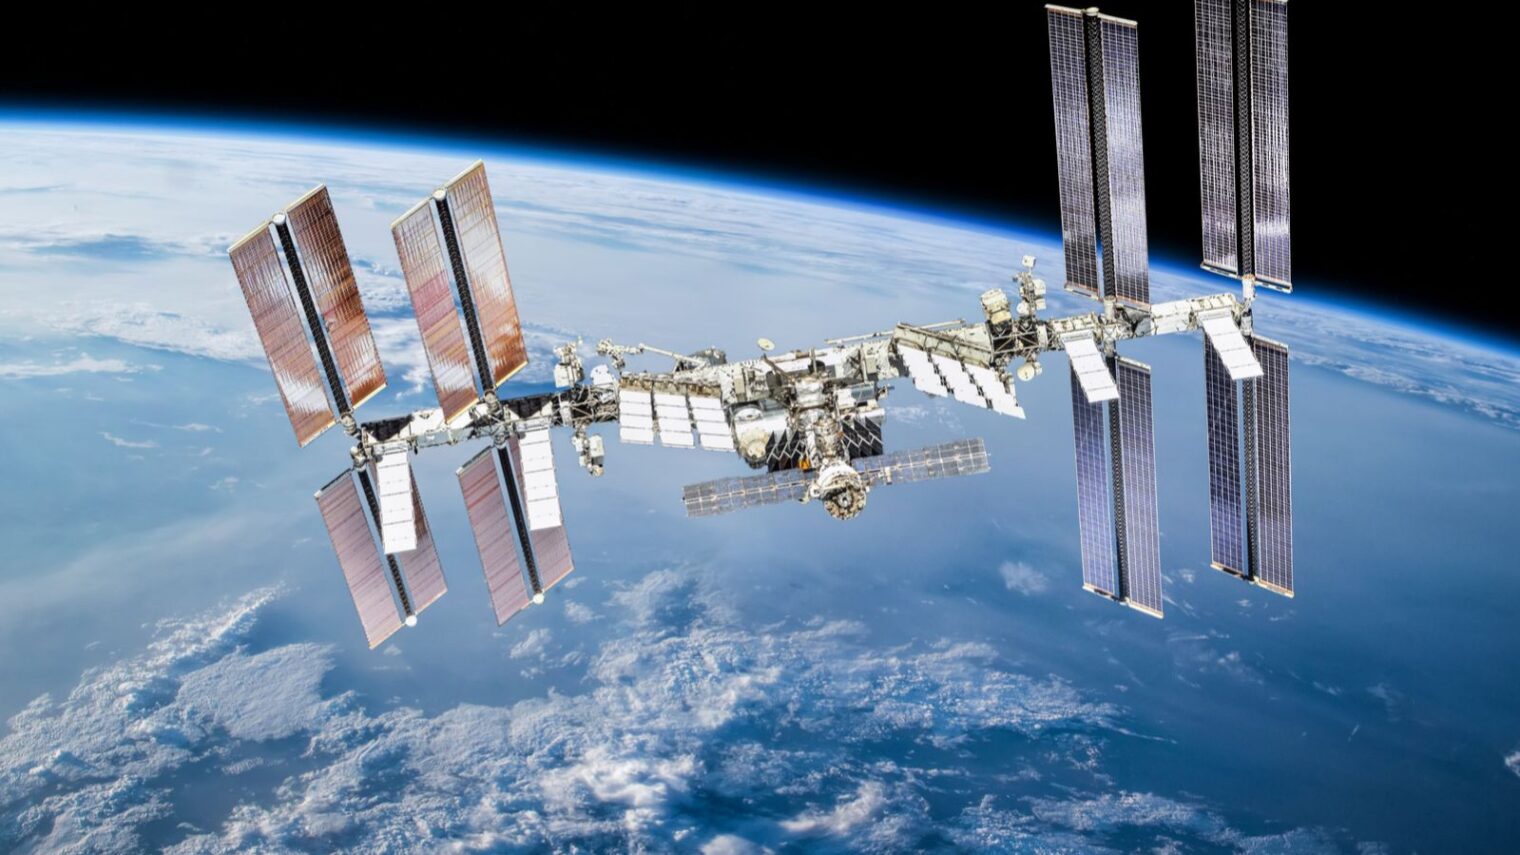 Forty-four Israeli experiments are set to reach the International Space Station. Photo by Dima Zel via Shutterstock.com